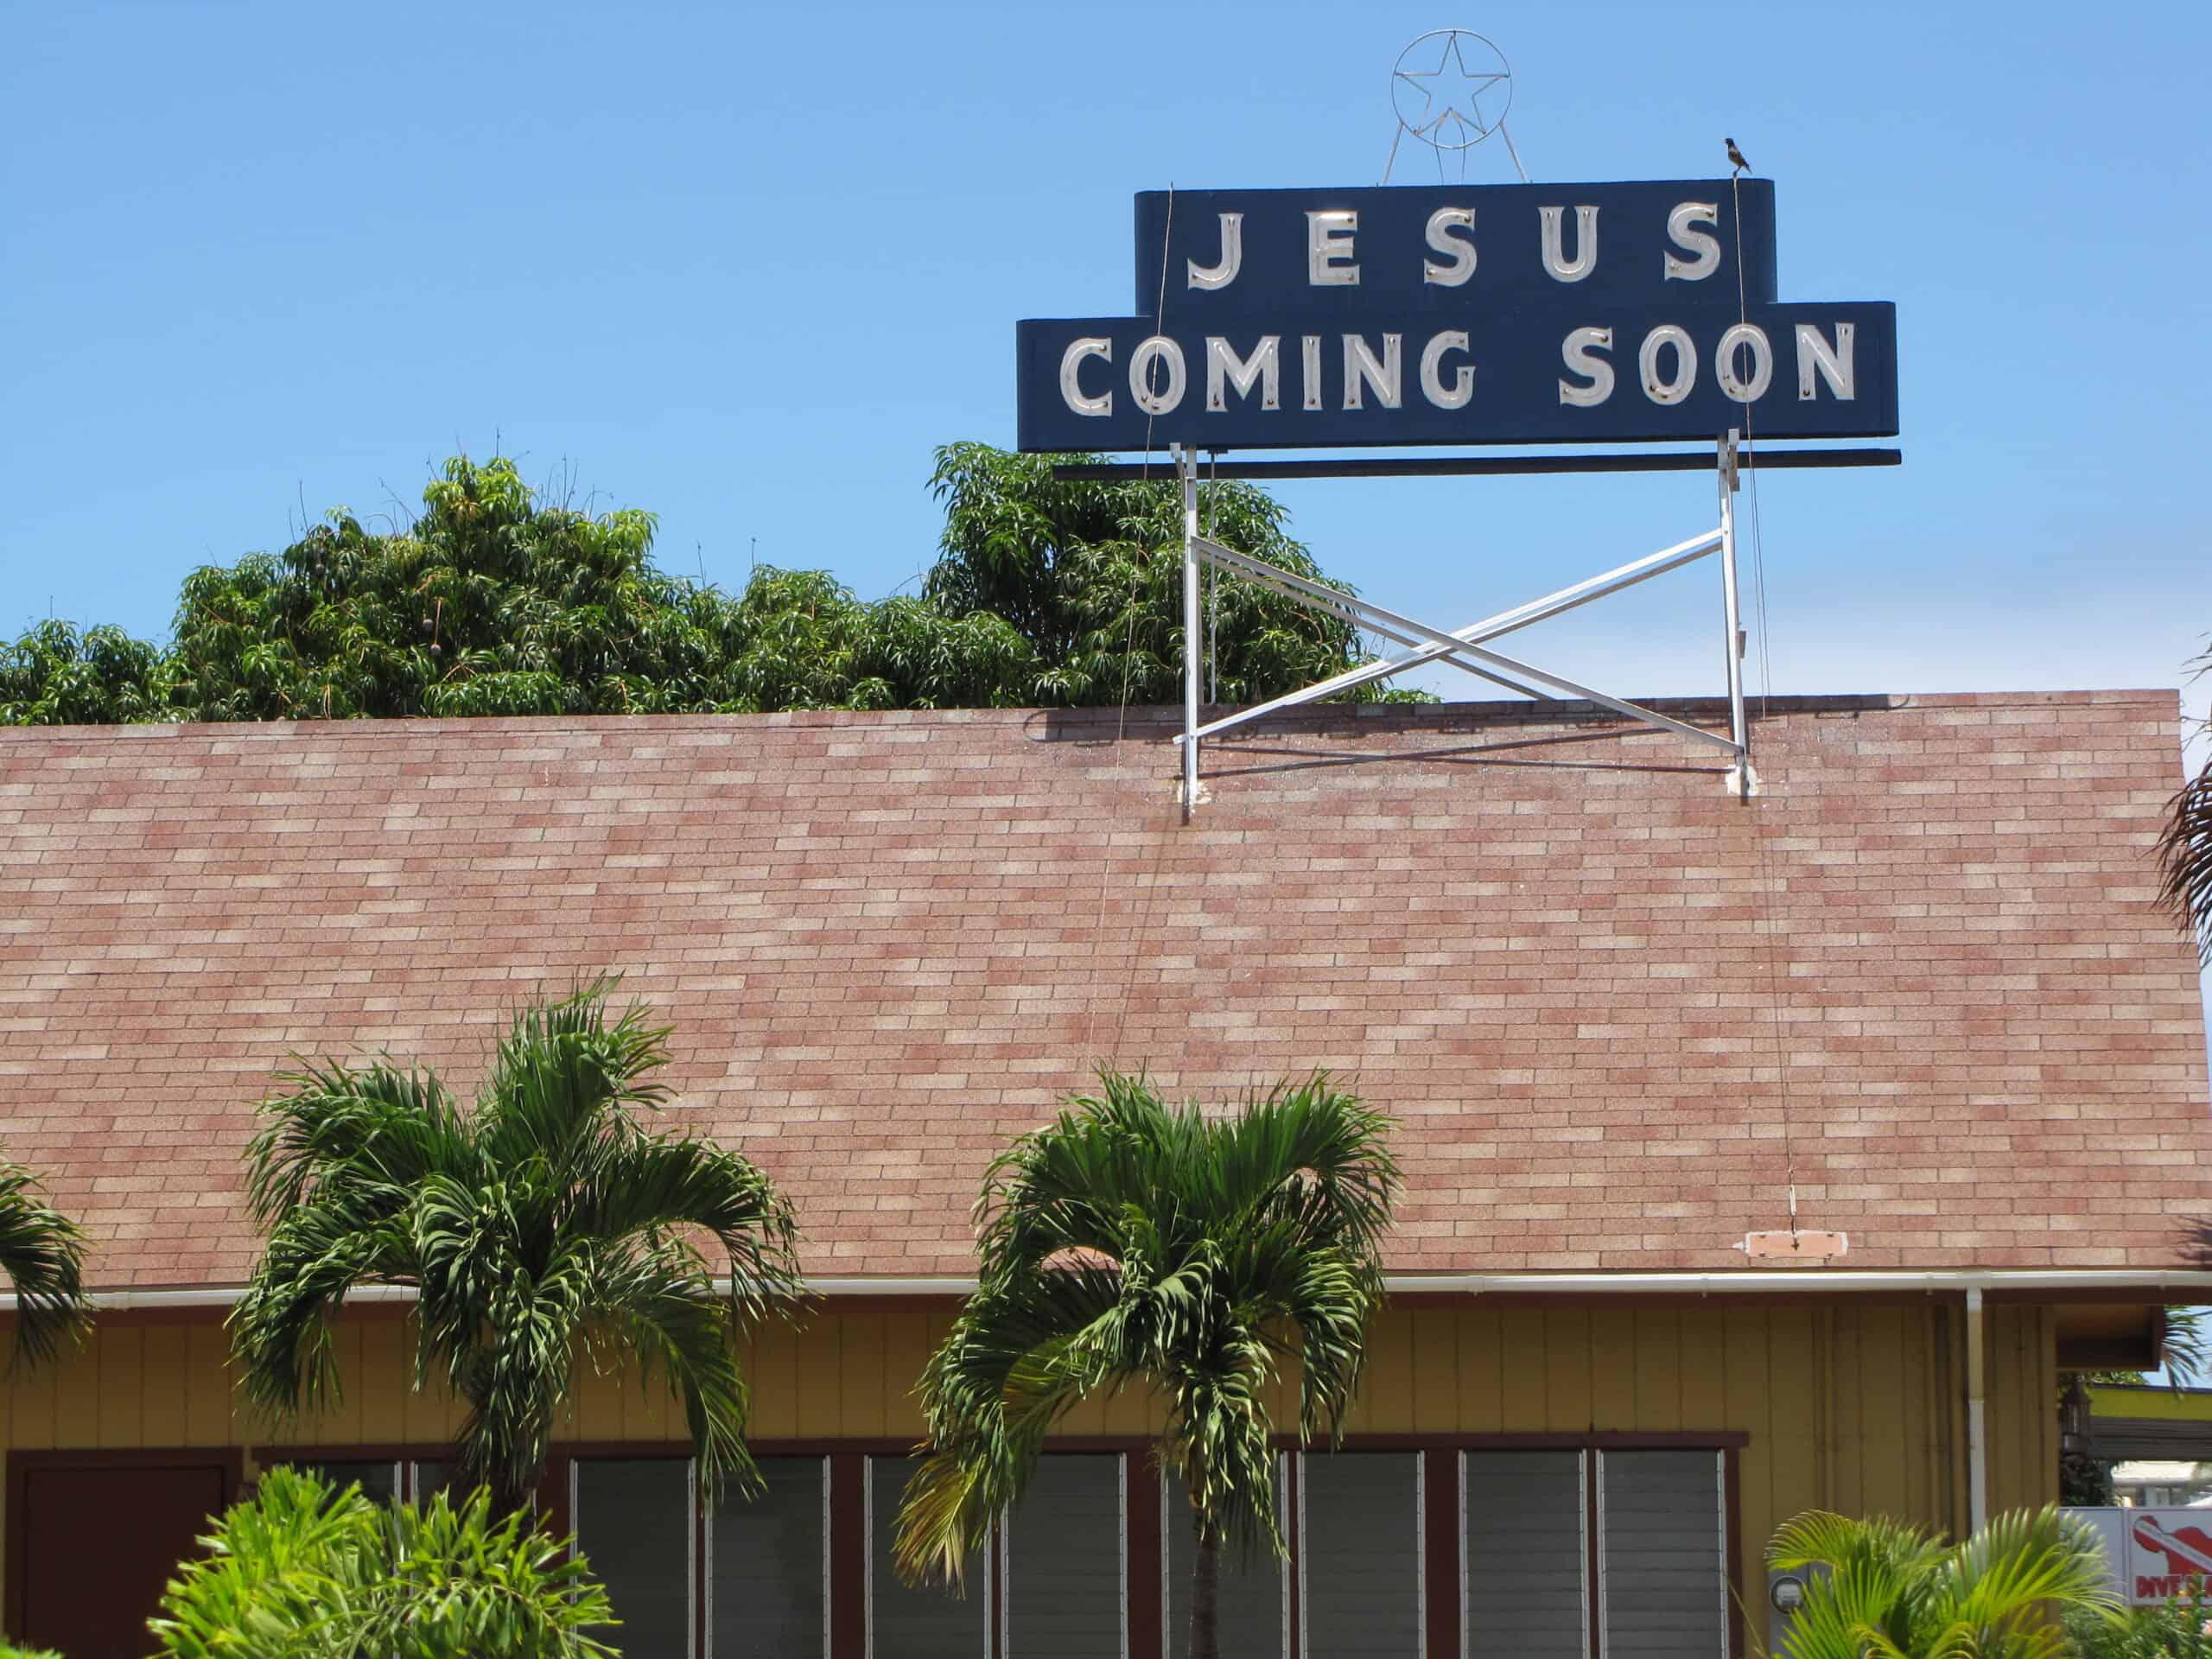 Starr-090709-2521-Veitchia merrillii-habit with Jesus Coming Soon sign-Lahaina-Maui by Forest and Kim Starr